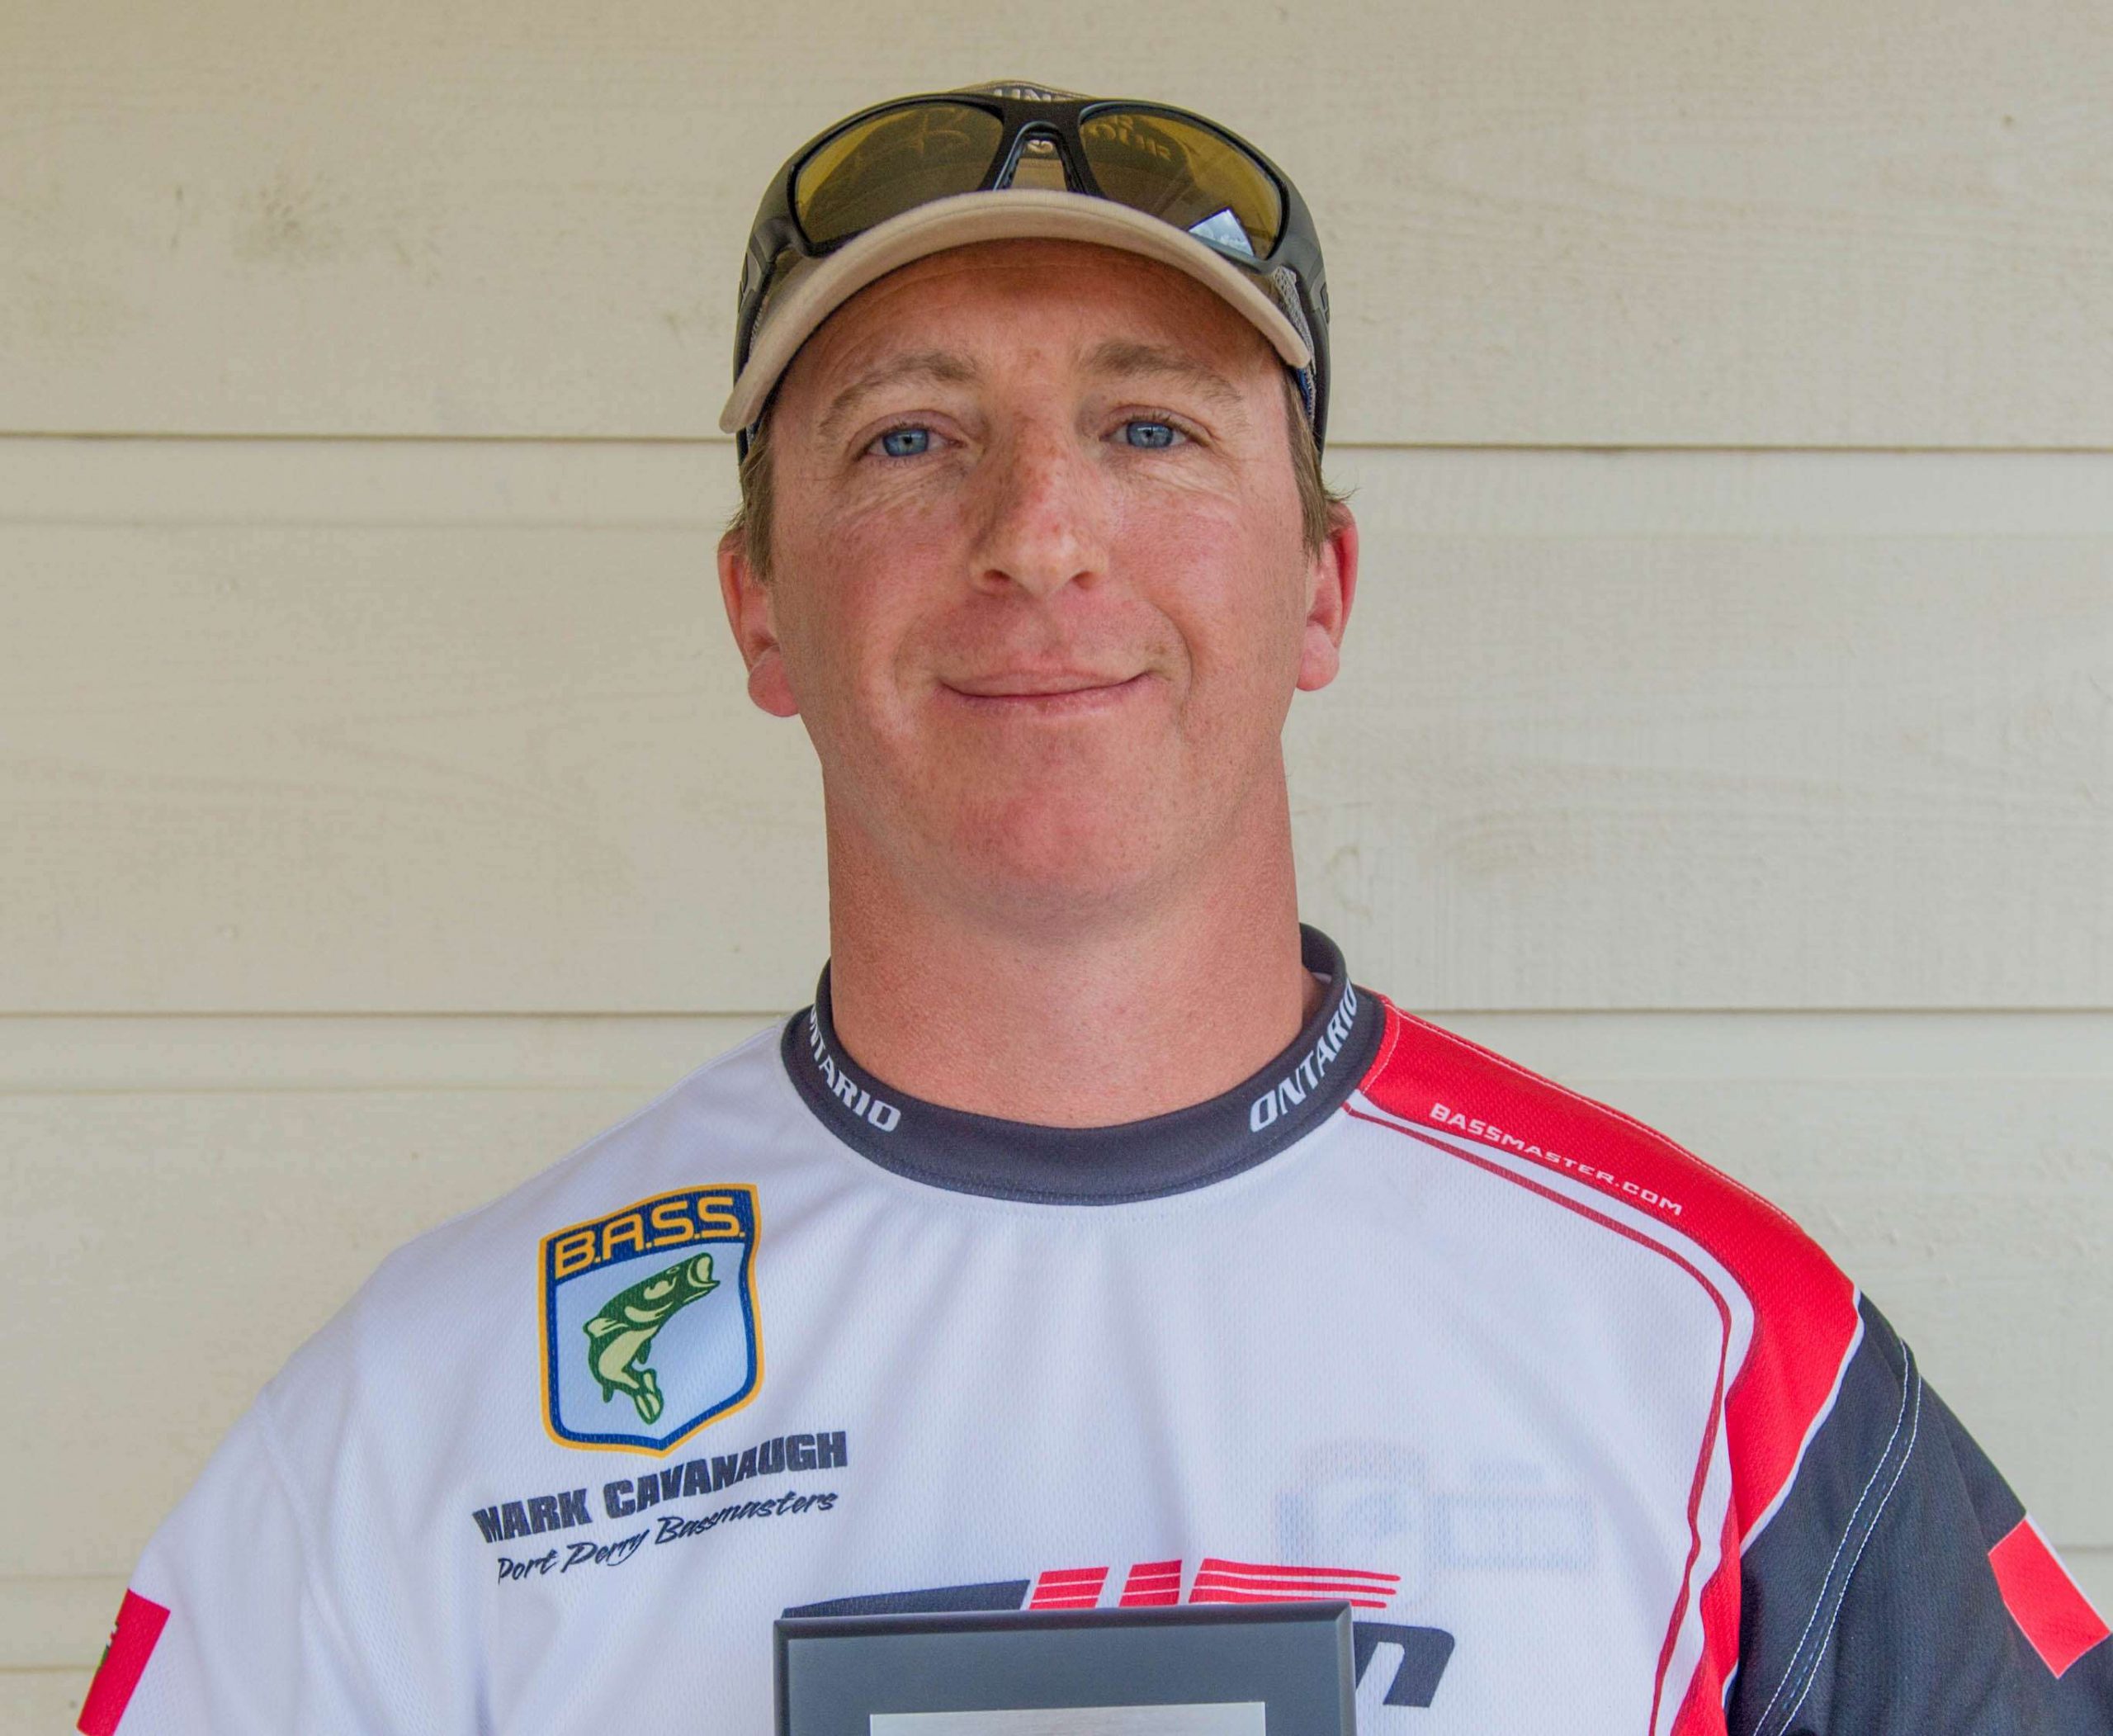 Mark Cavanaugh <br>
Ontario Boater <br>
Mark Cavanaugh is a utility coordinator in Ontario. The Canadian angler will be fishing his first championship. He likes hockey, being outdoors and coaching kidsâ sports. Heâs a member of the Port Perry Bassmasters, and heâs sponsored by Quantum, The Perfect Jig, Smith Brothers, T2 Utility Engineers and Nichols Lures. 